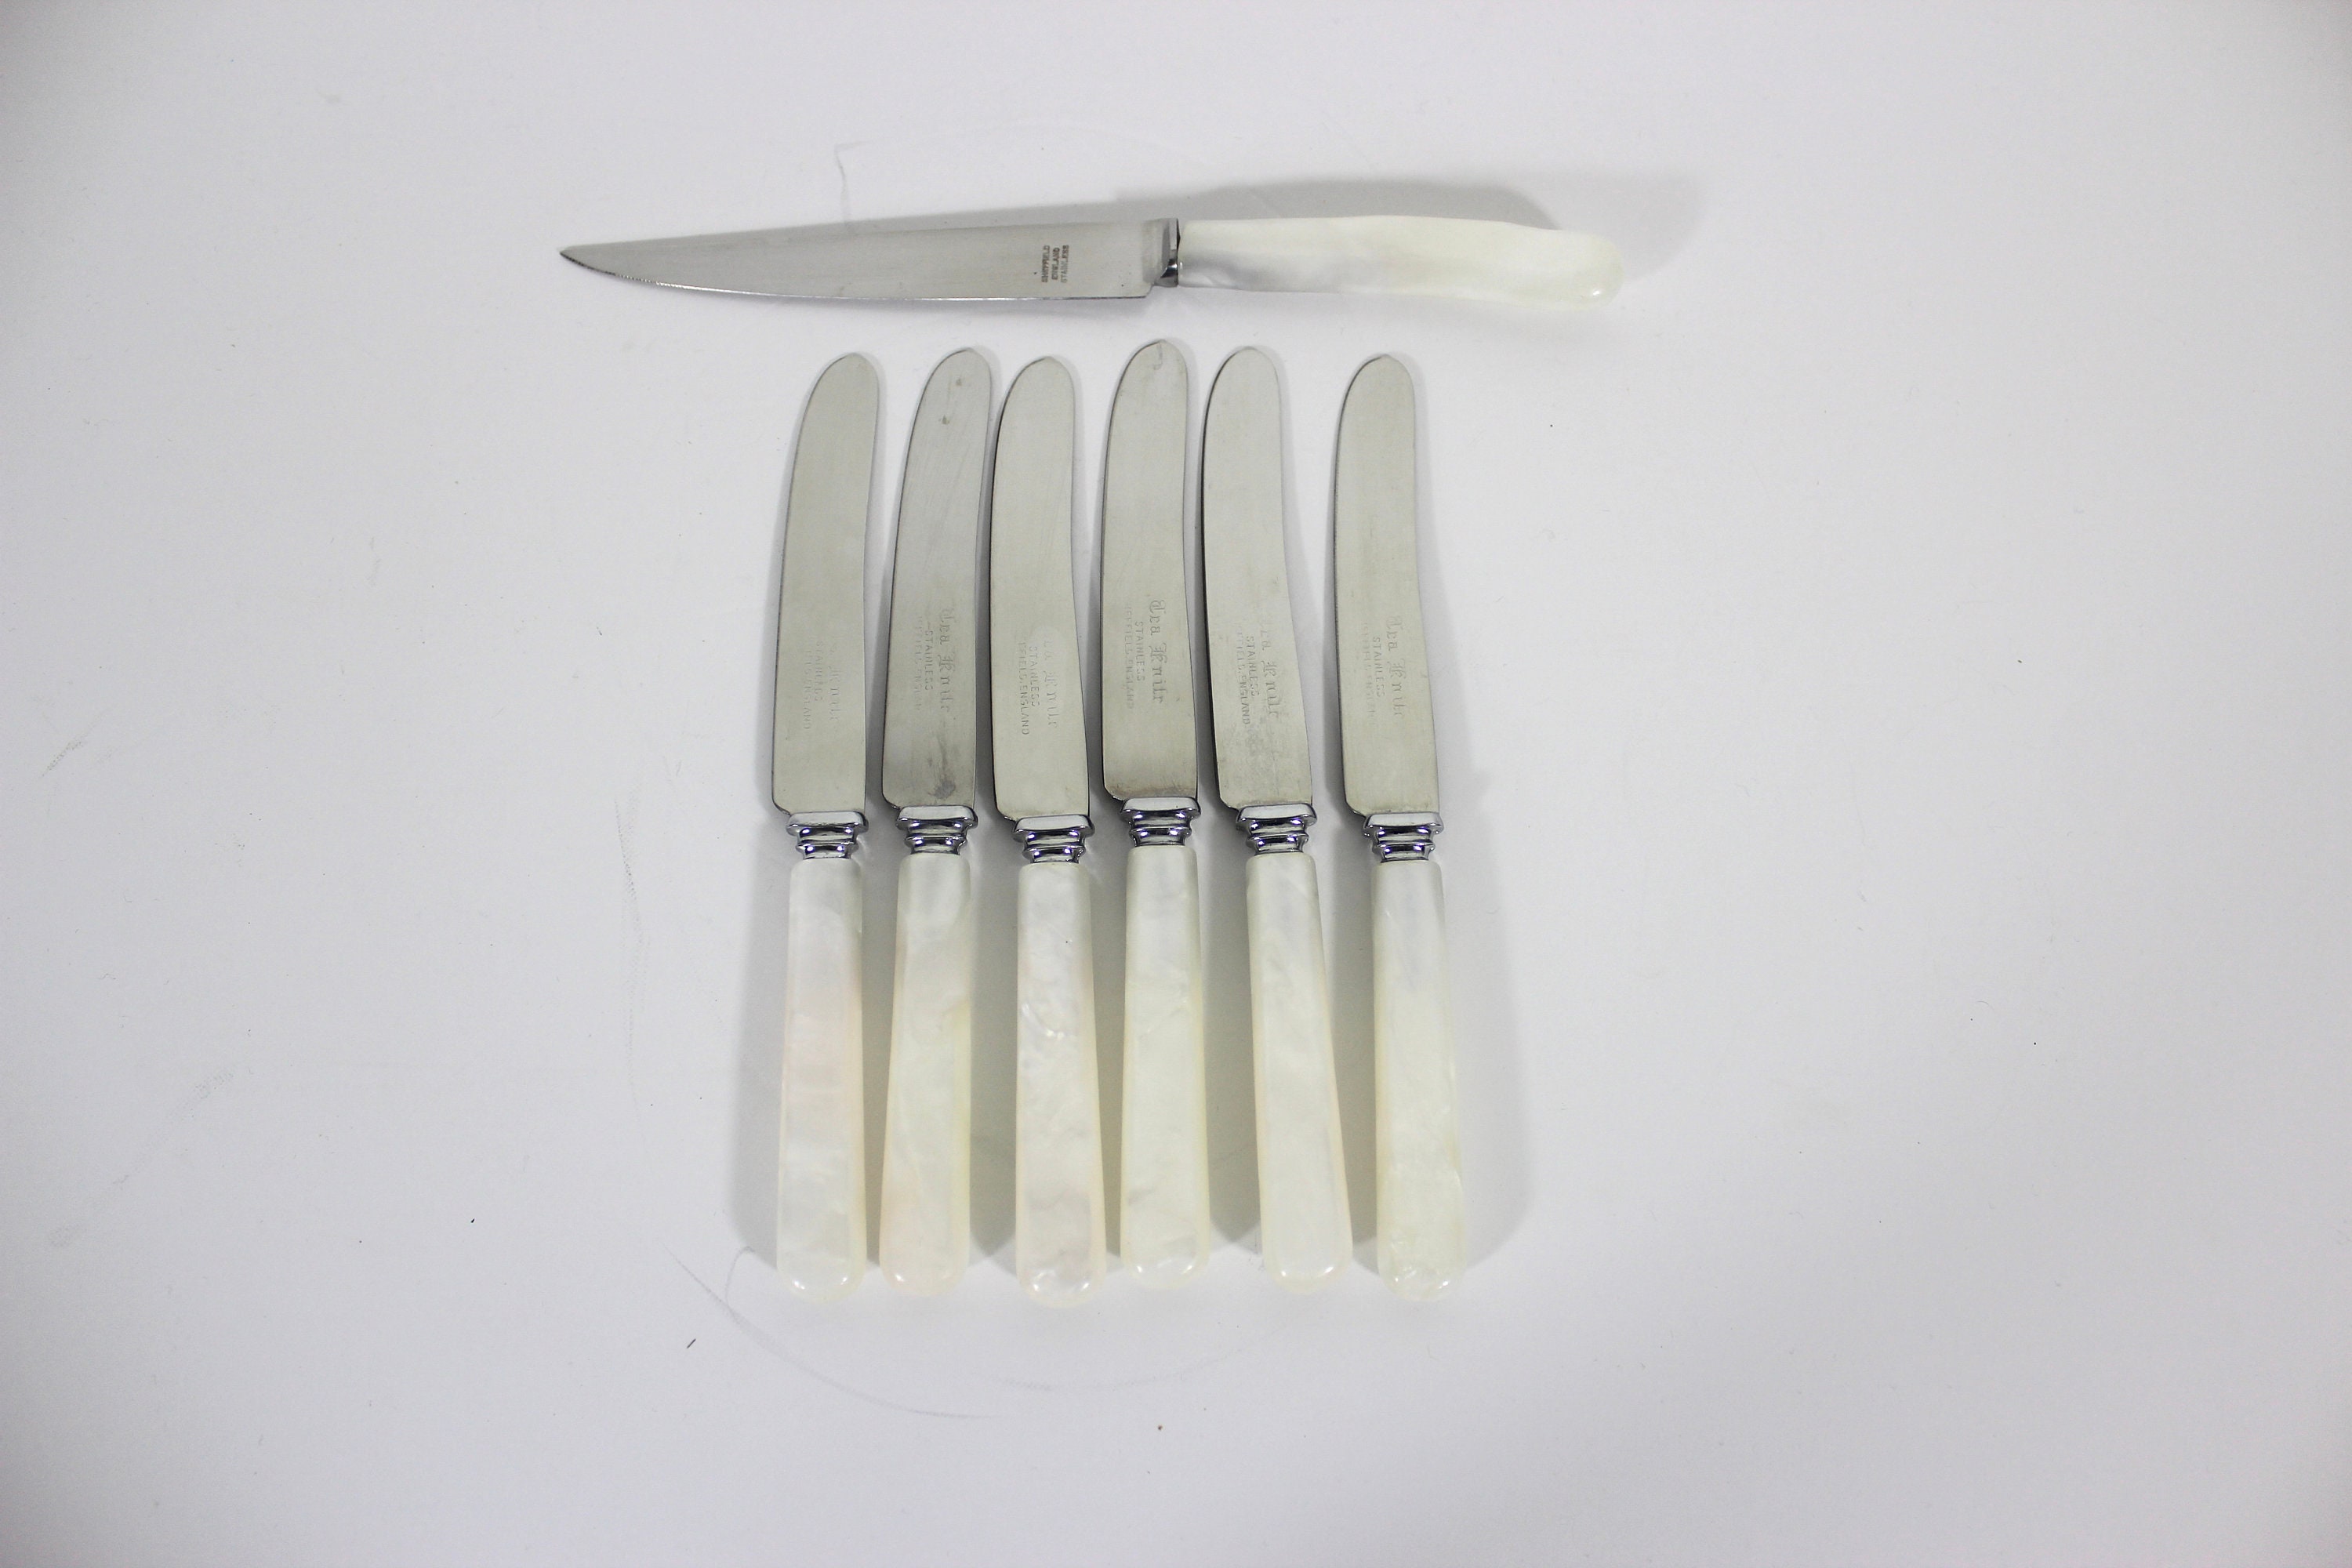 4 piece Regent Sheffield Cheese Knife Set Plastic Marbled Style Handles